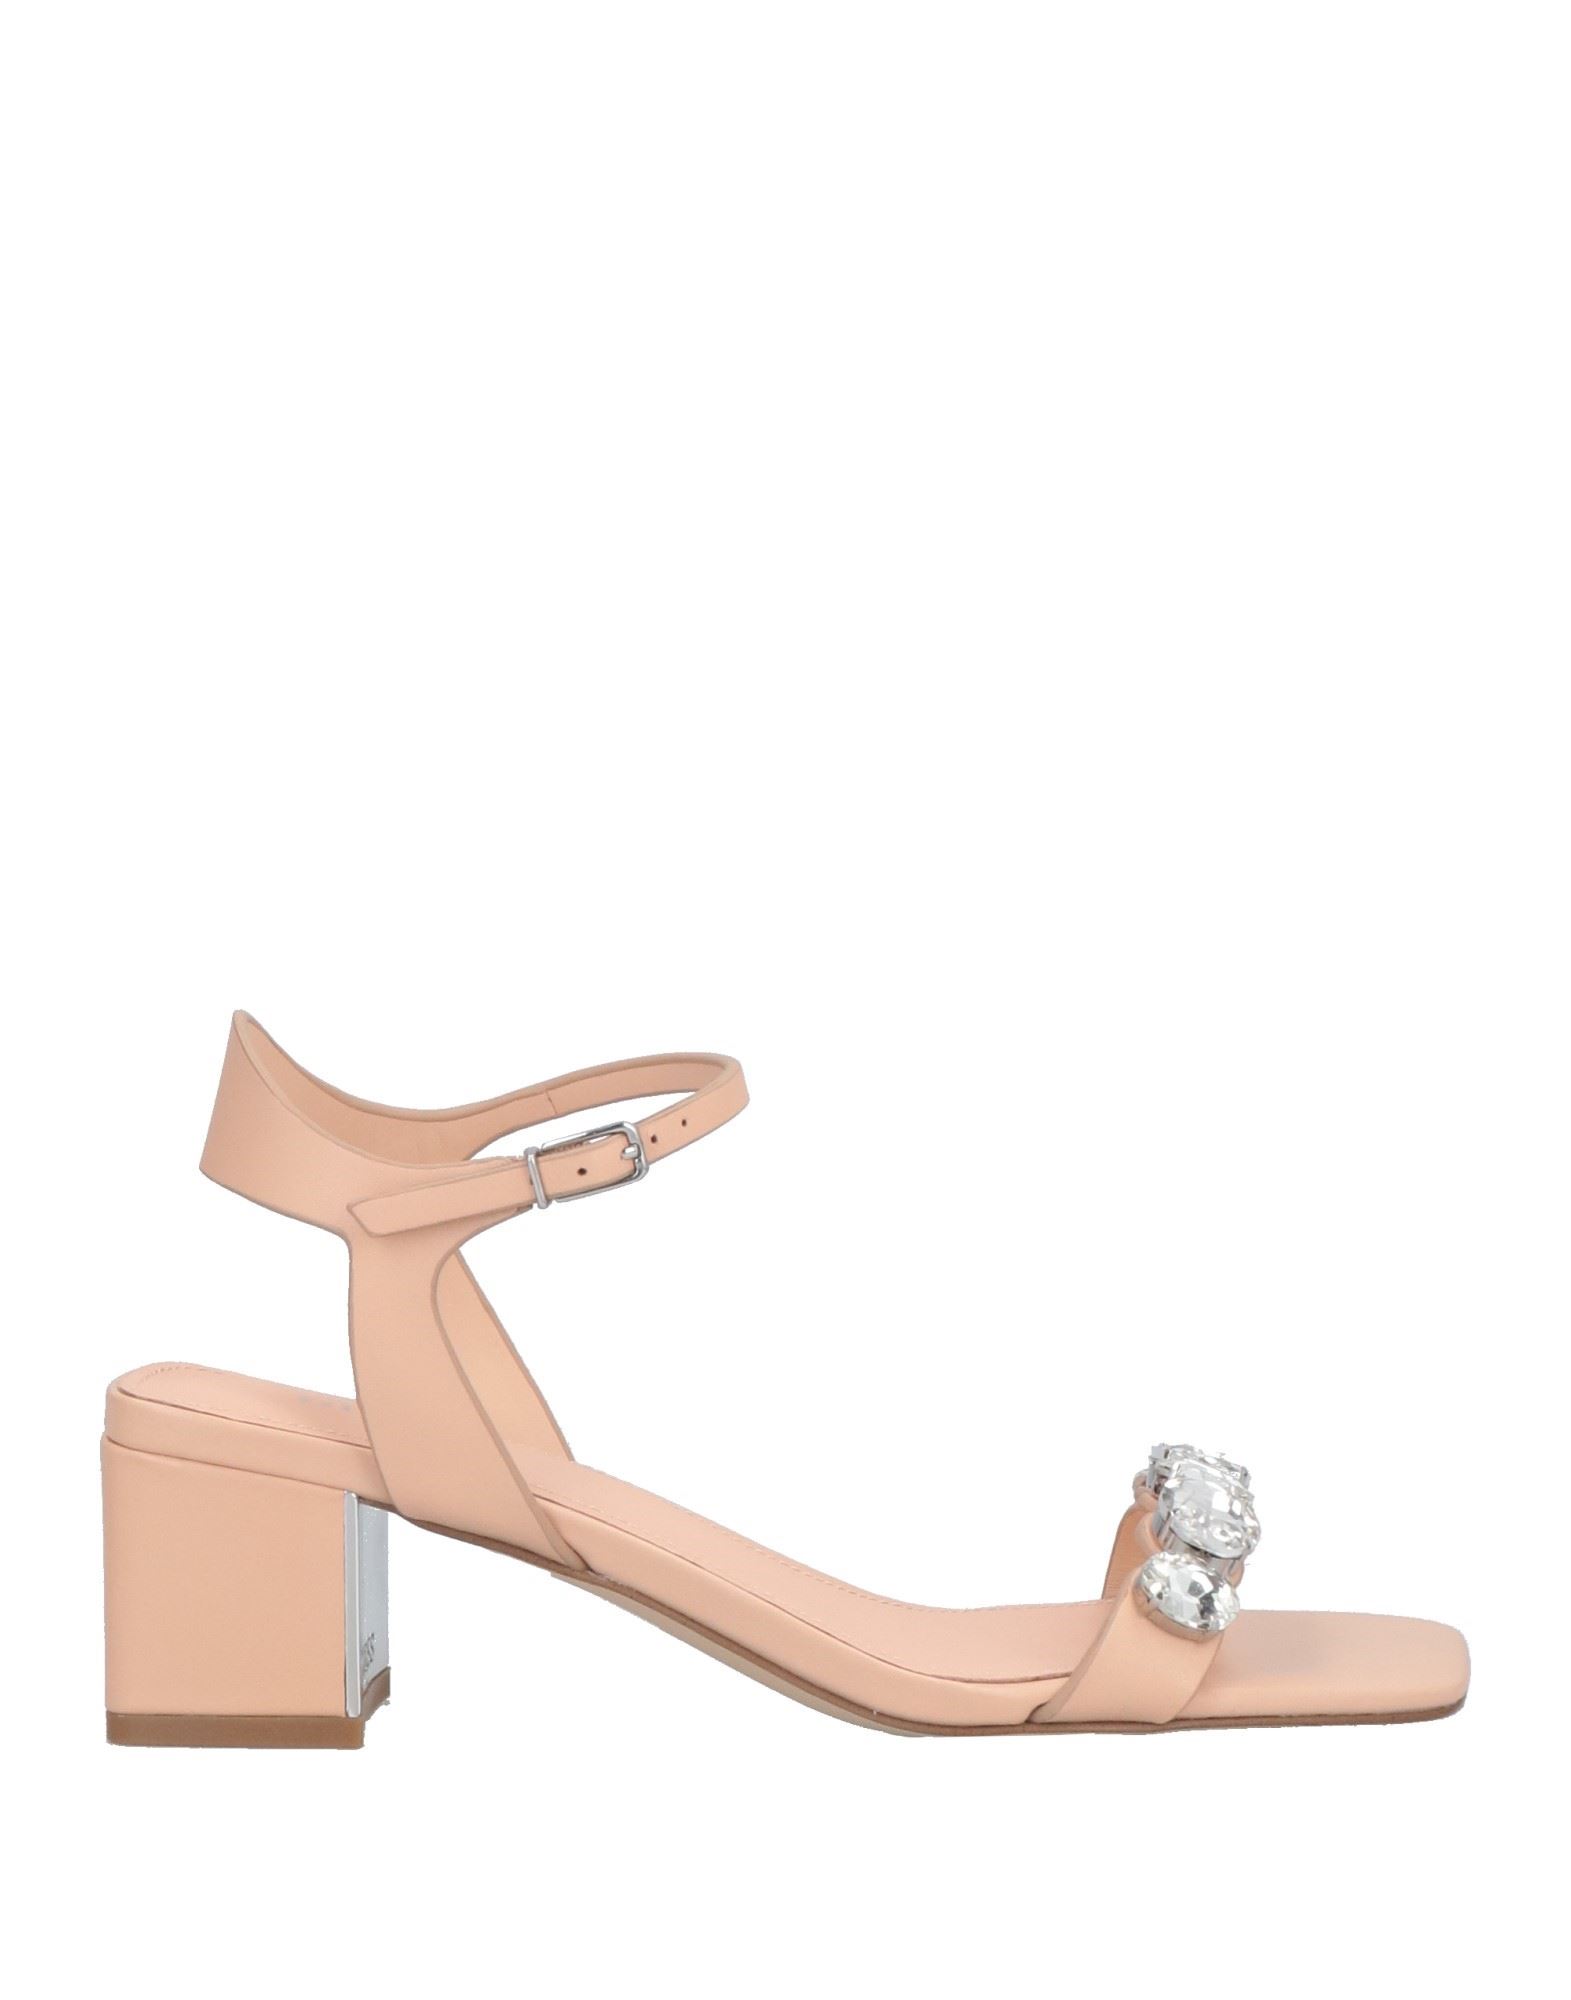 Guess Sandals In Pink